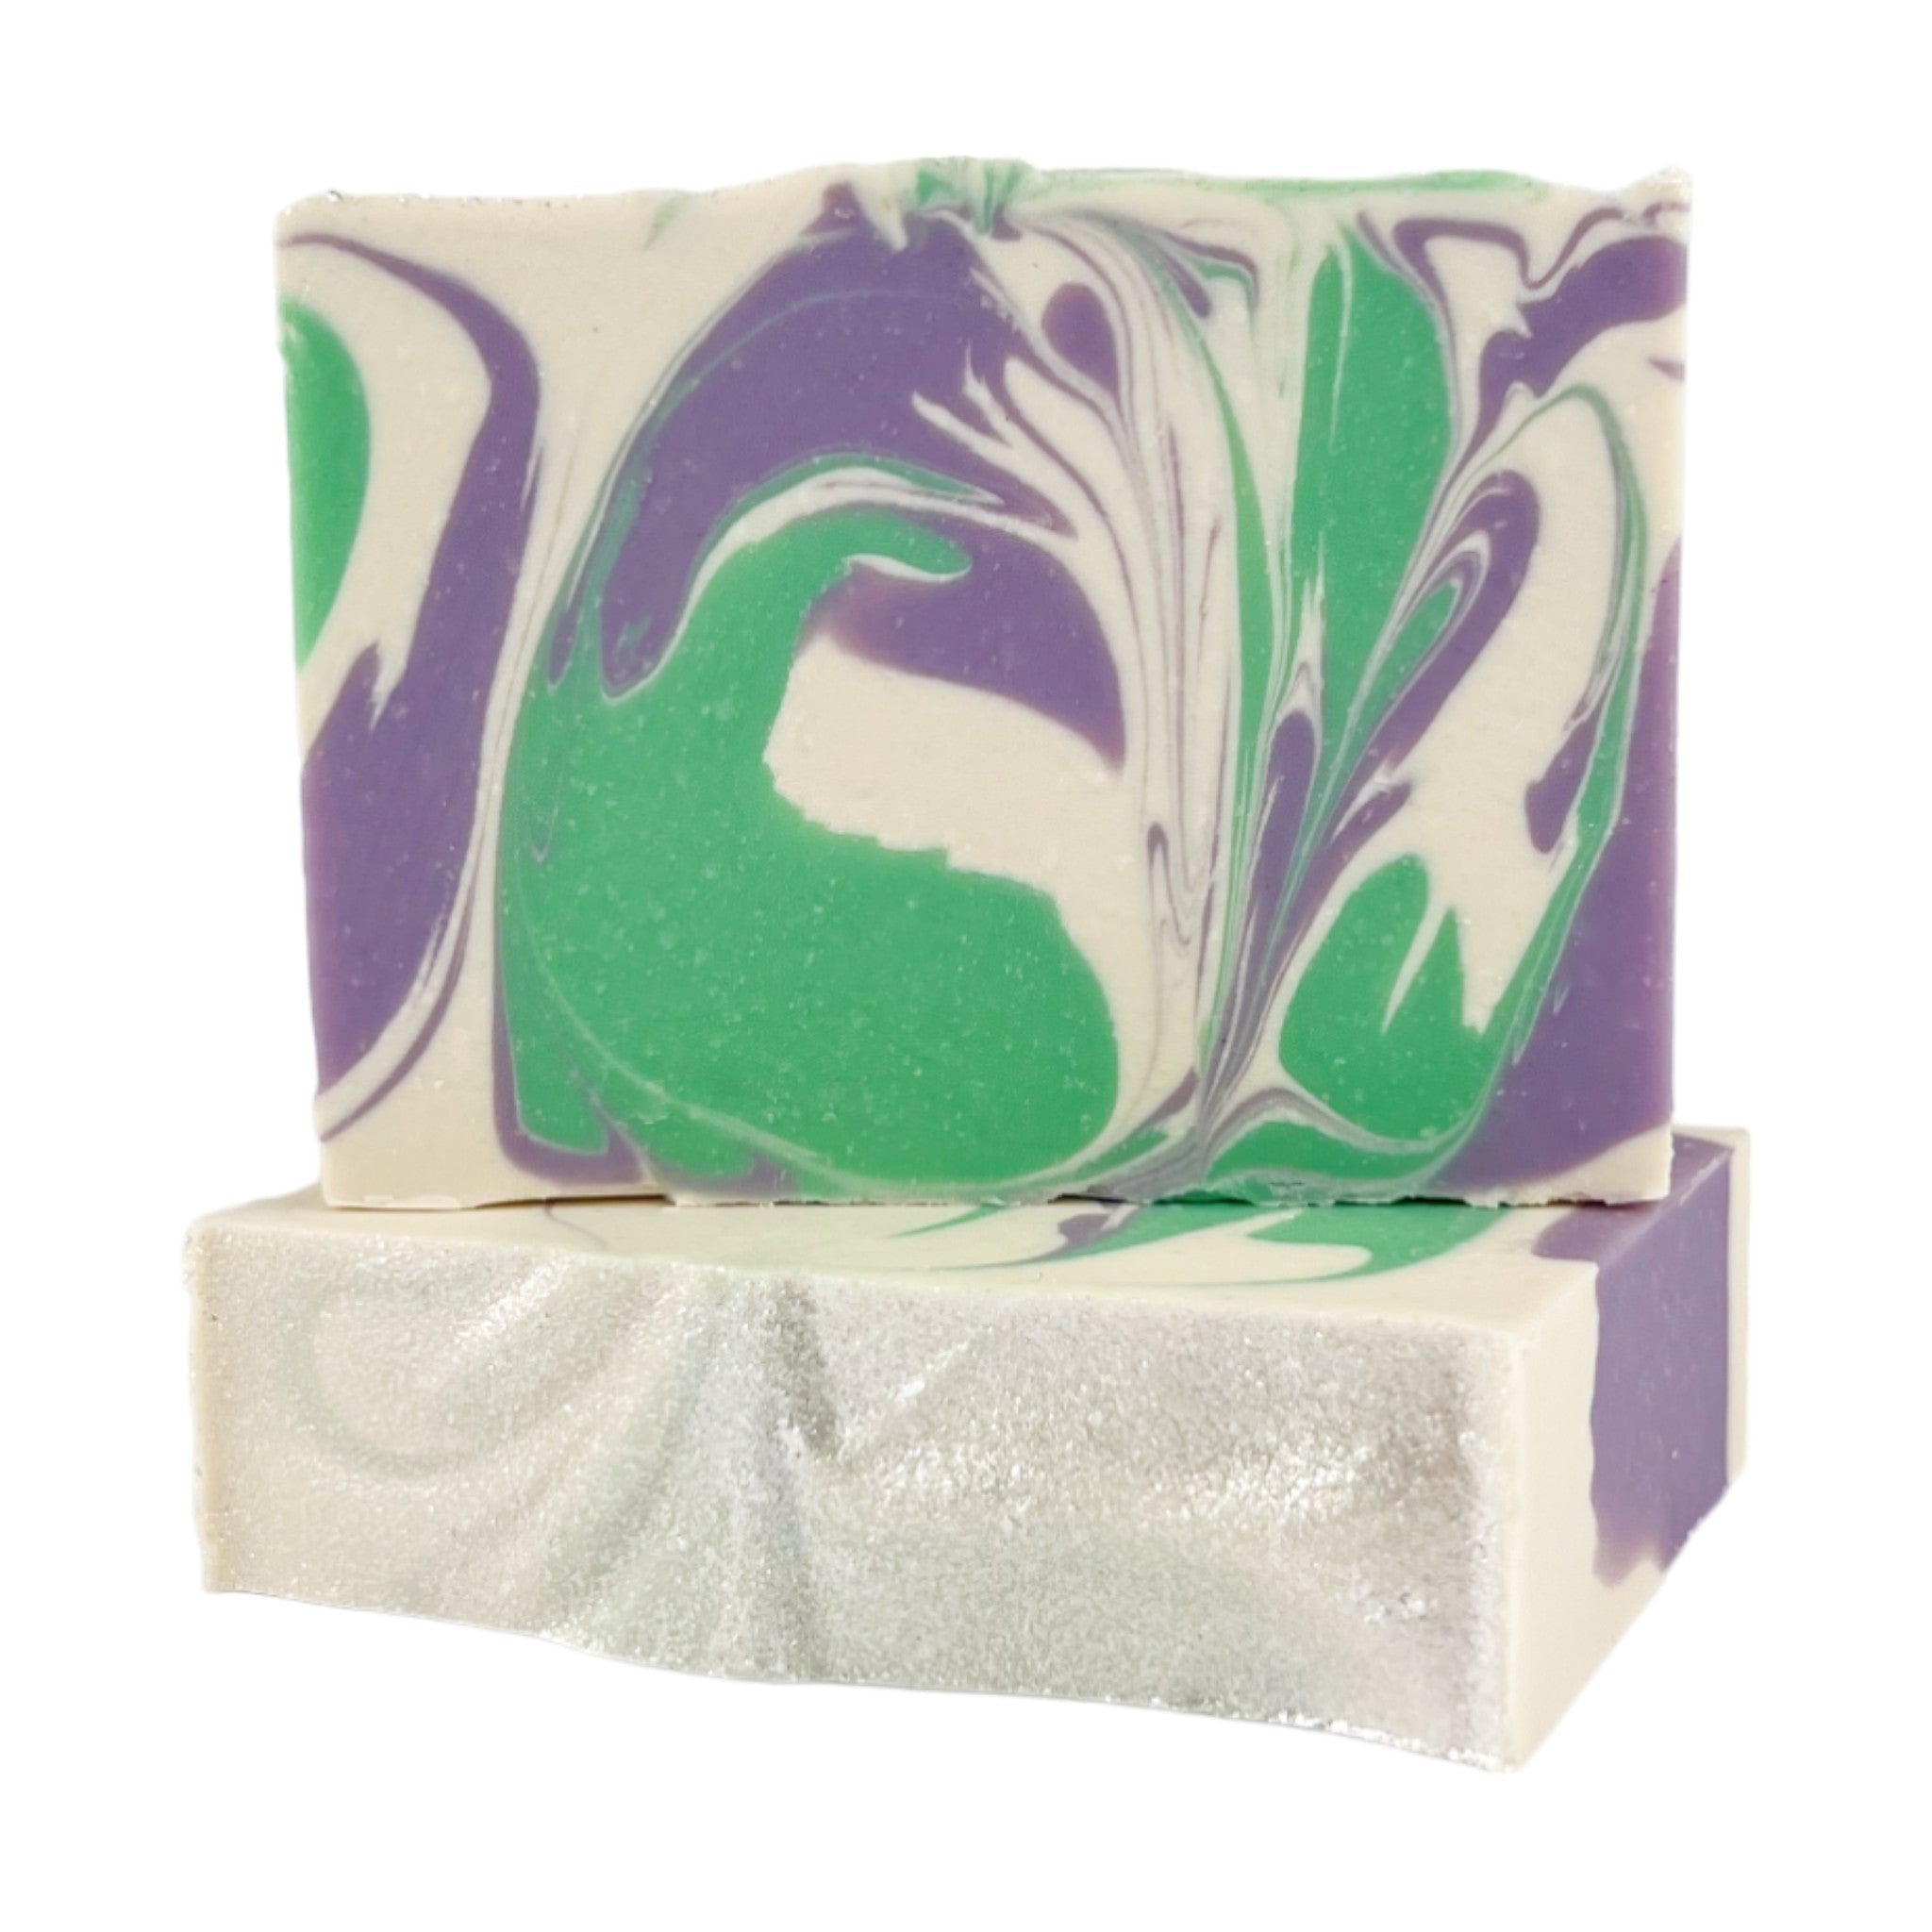 Lavender &amp; Rosemary -Bar Soap - Old Town Soap Co.